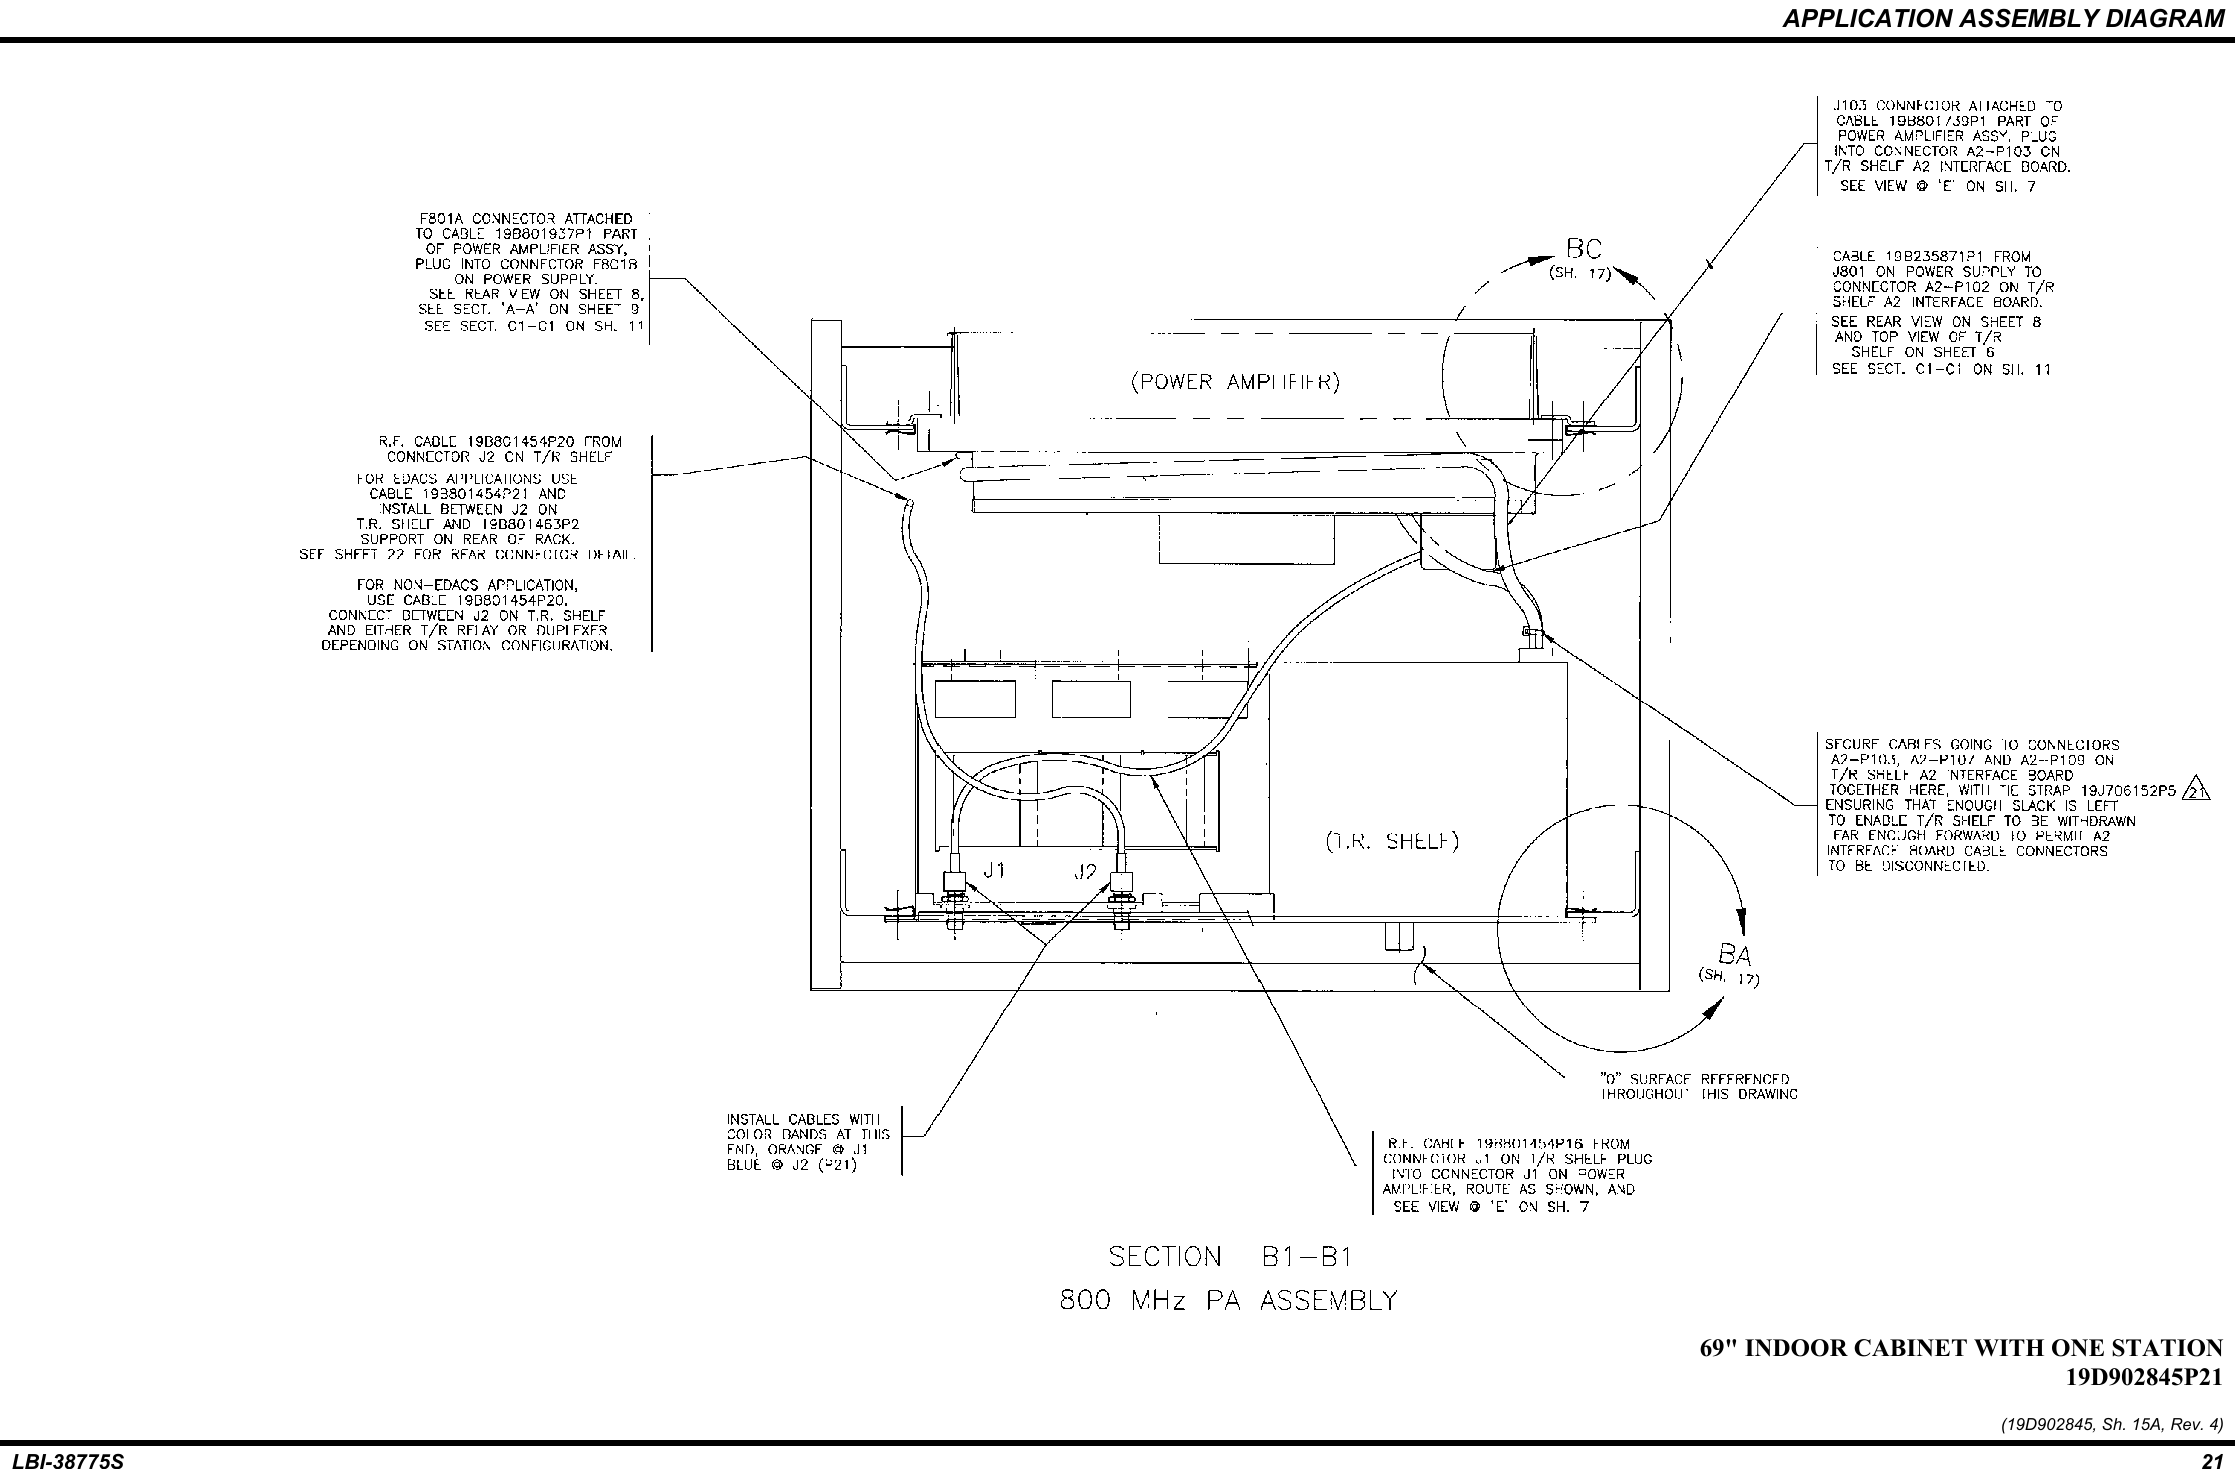 APPLICATION ASSEMBLY DIAGRAMLBI-38775S 2169&quot; INDOOR CABINET WITH ONE STATION19D902845P21(19D902845, Sh. 15A, Rev. 4)